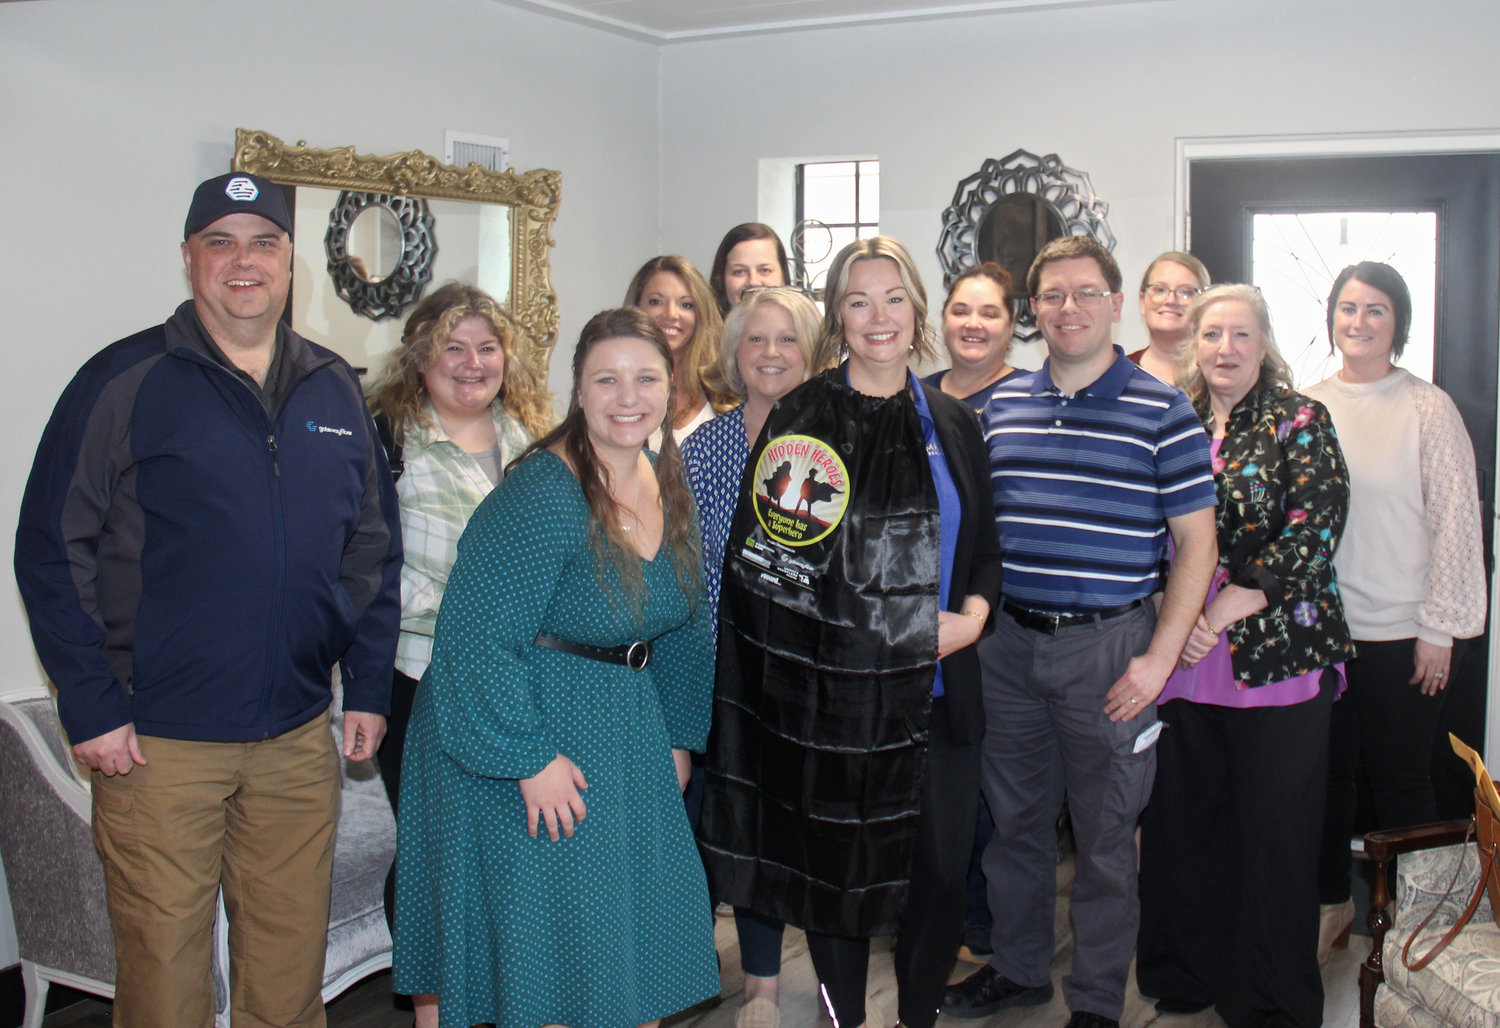 HIDDEN HERO — Stacey Blondin receives her very own superhero cape as she is joined by staff members at Main Street real estate, along with community supporters of the Hidden Heroes program.